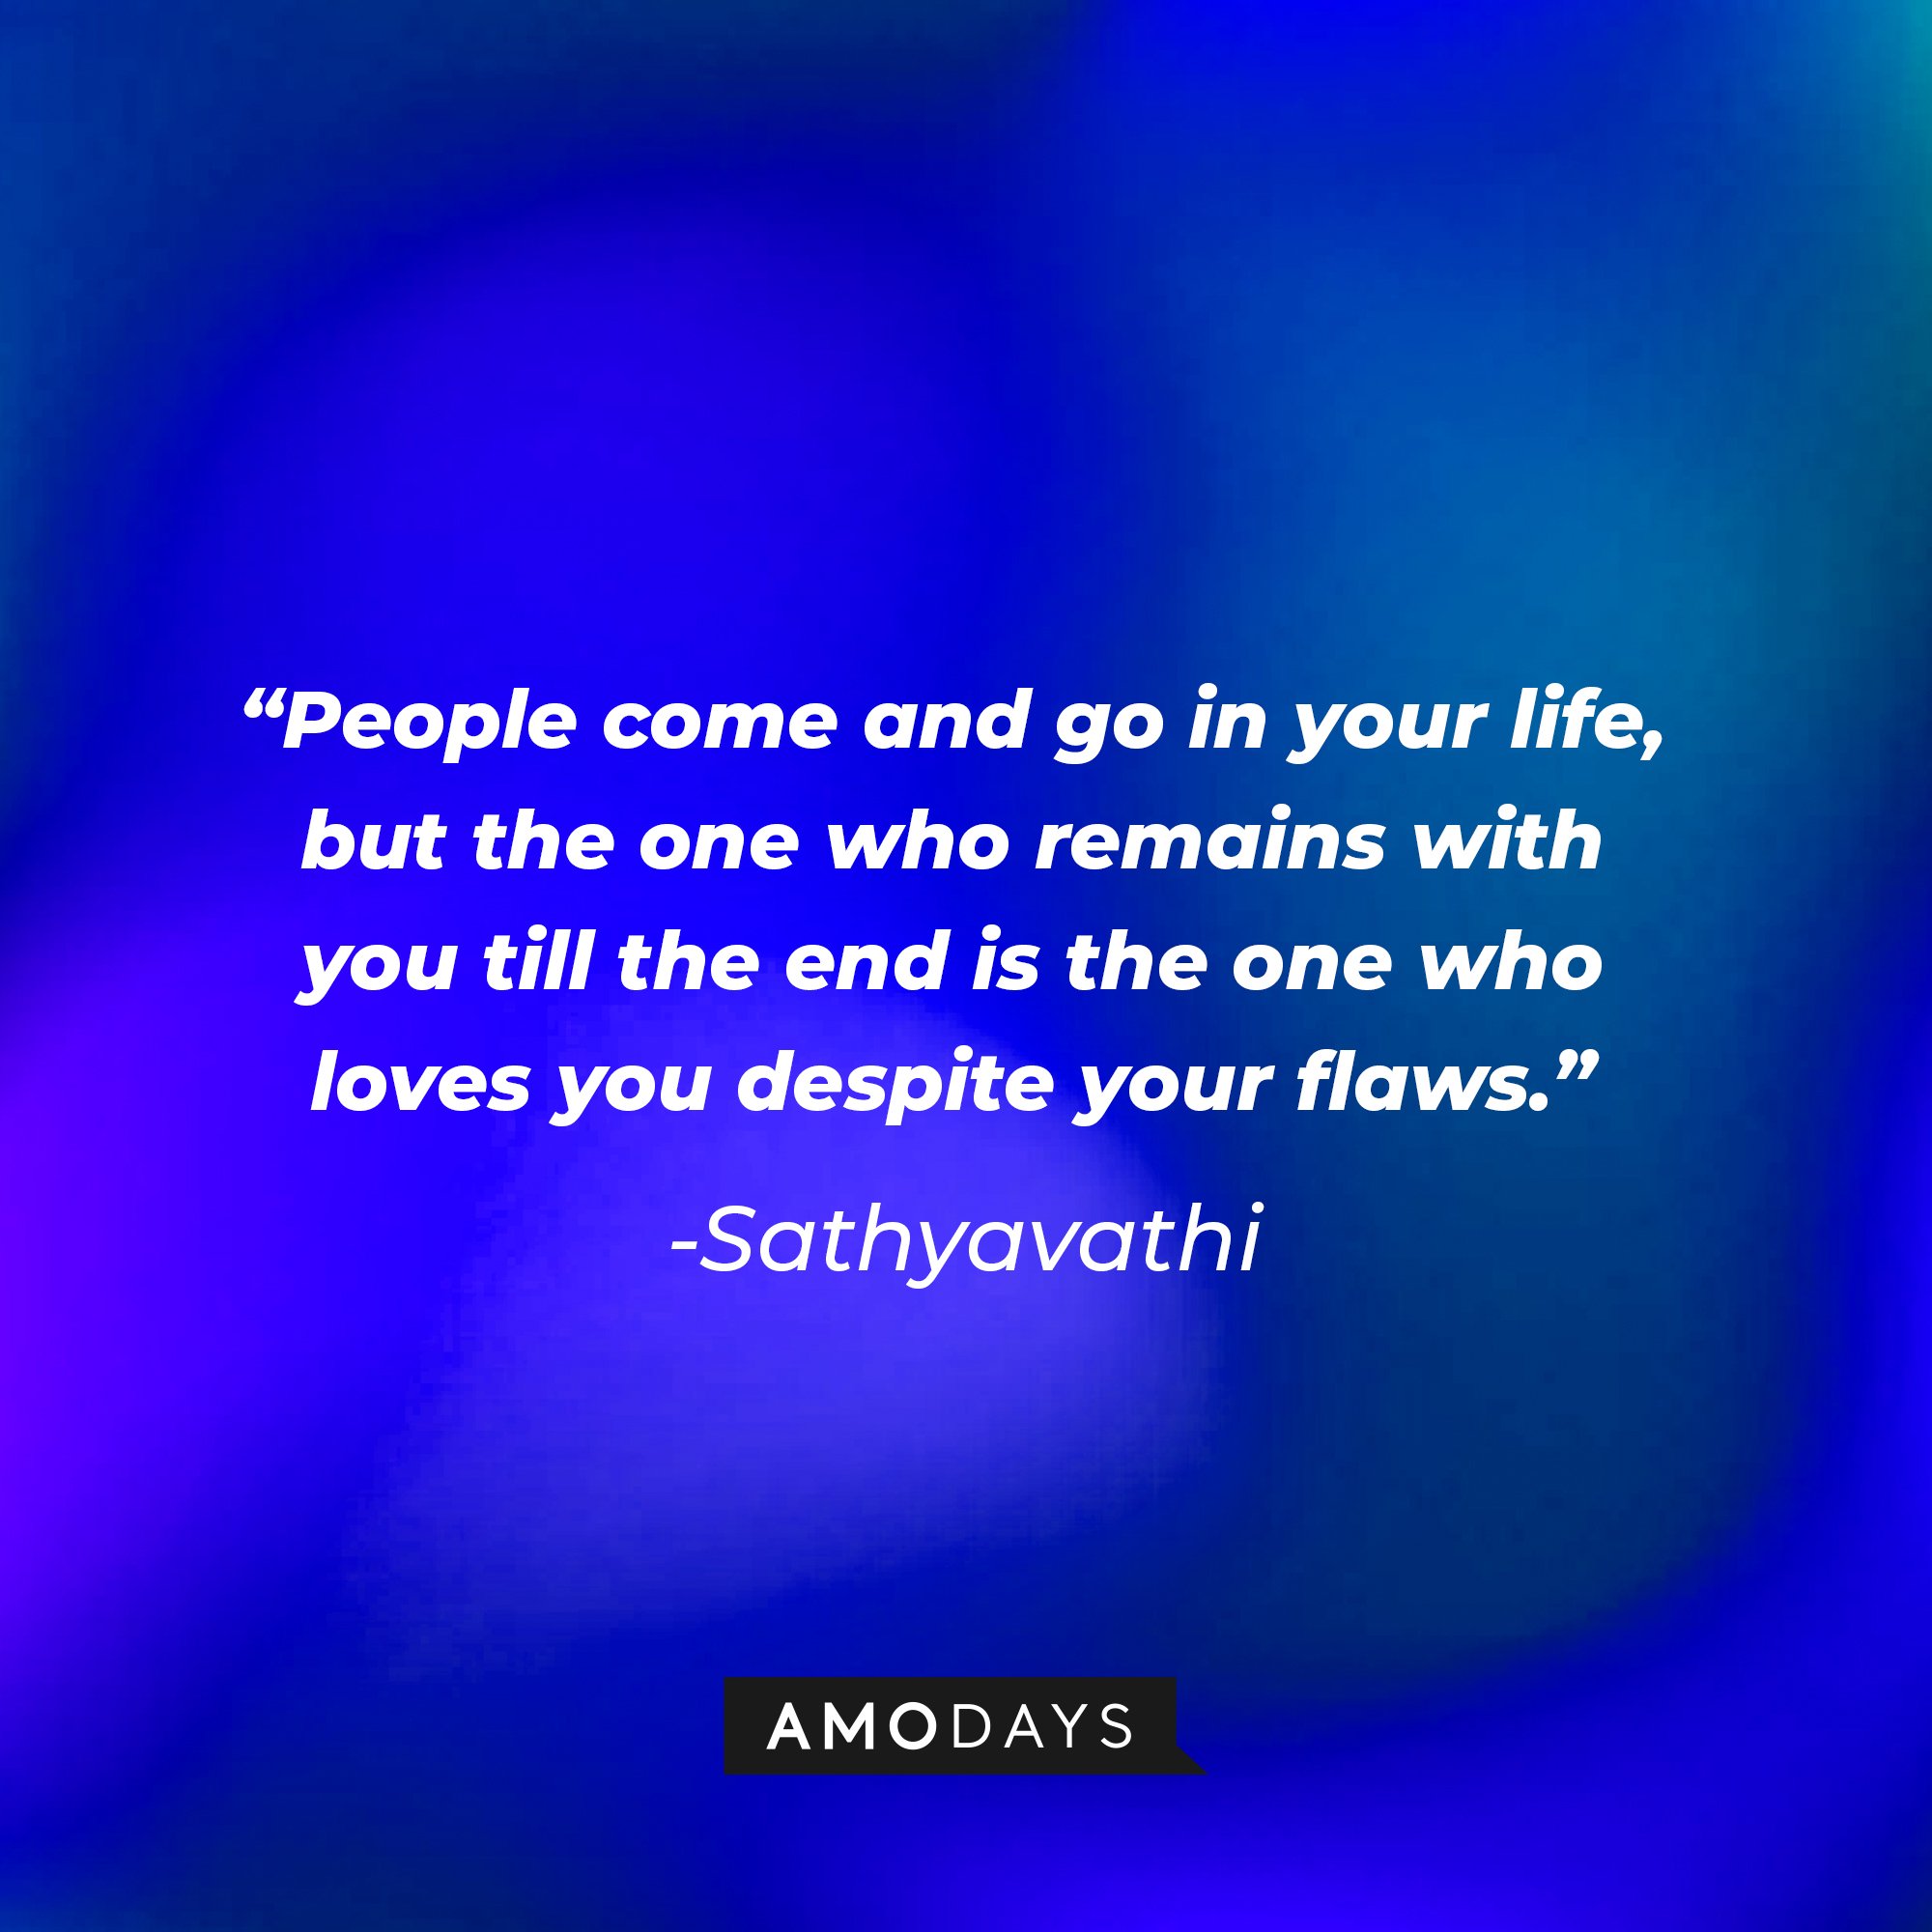 Sathyavathi’s quote: "People come and go in your life, but the one who remains with you till the end is the one who loves you despite your flaws." | Image: AmoDays